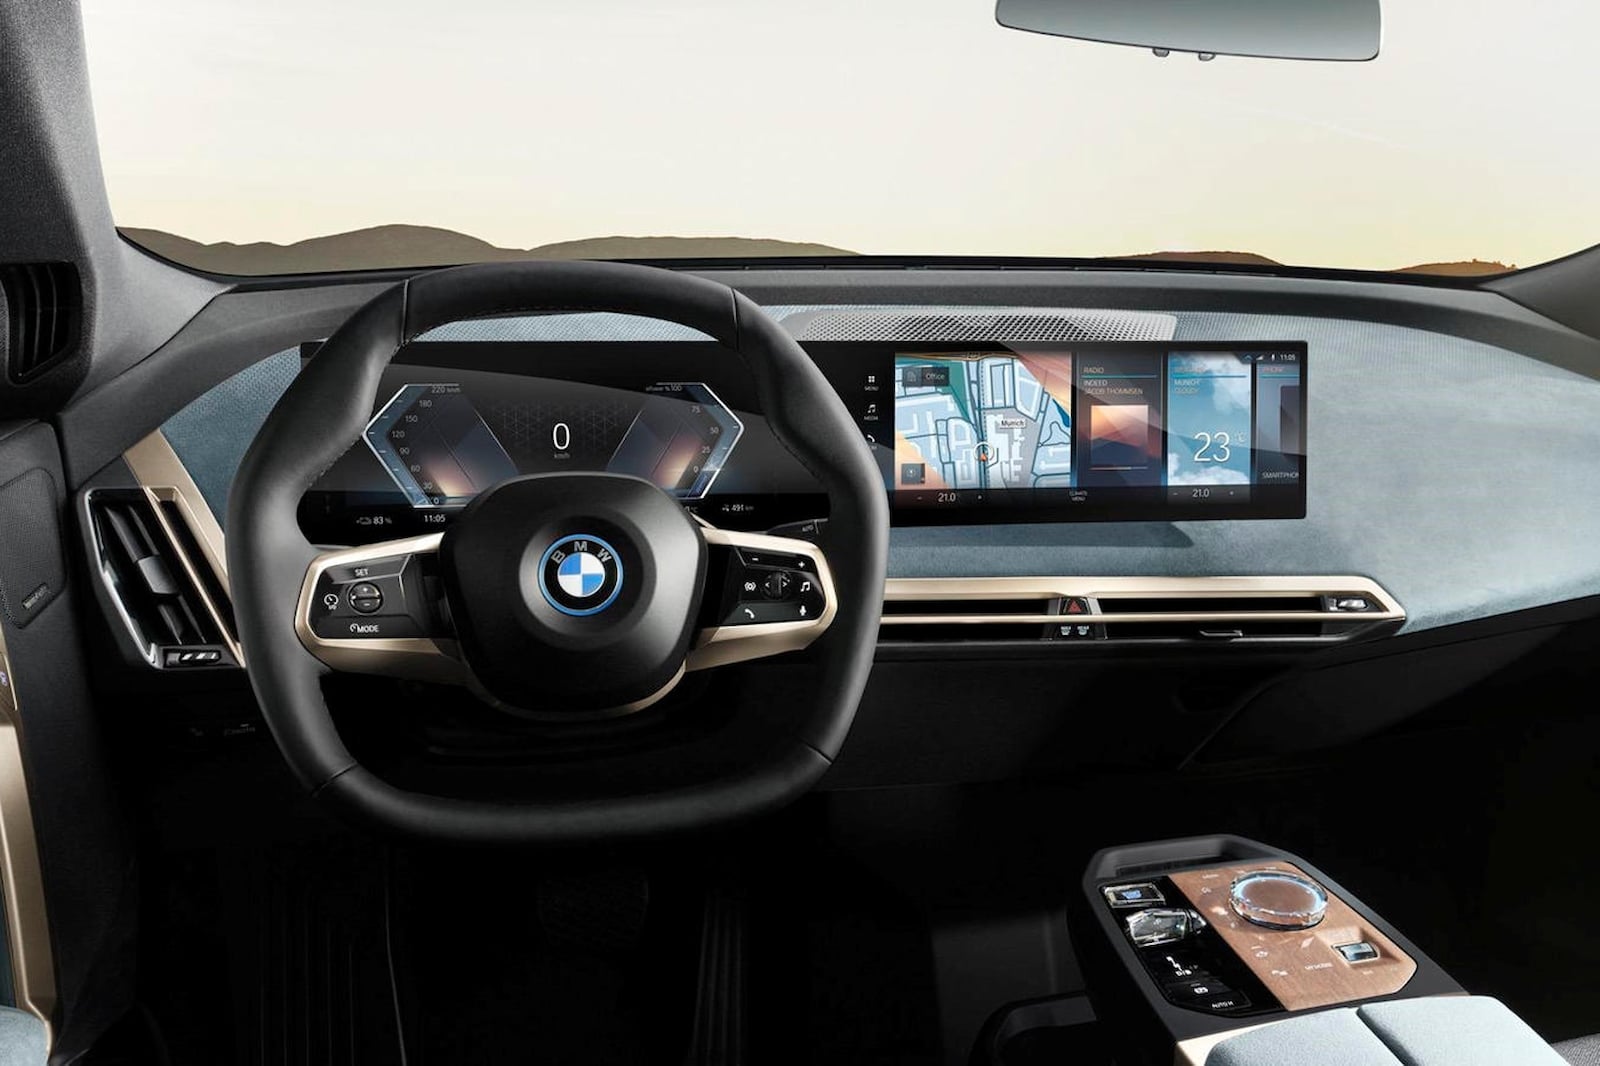 7 Best Current Infotainment Systems Ranked